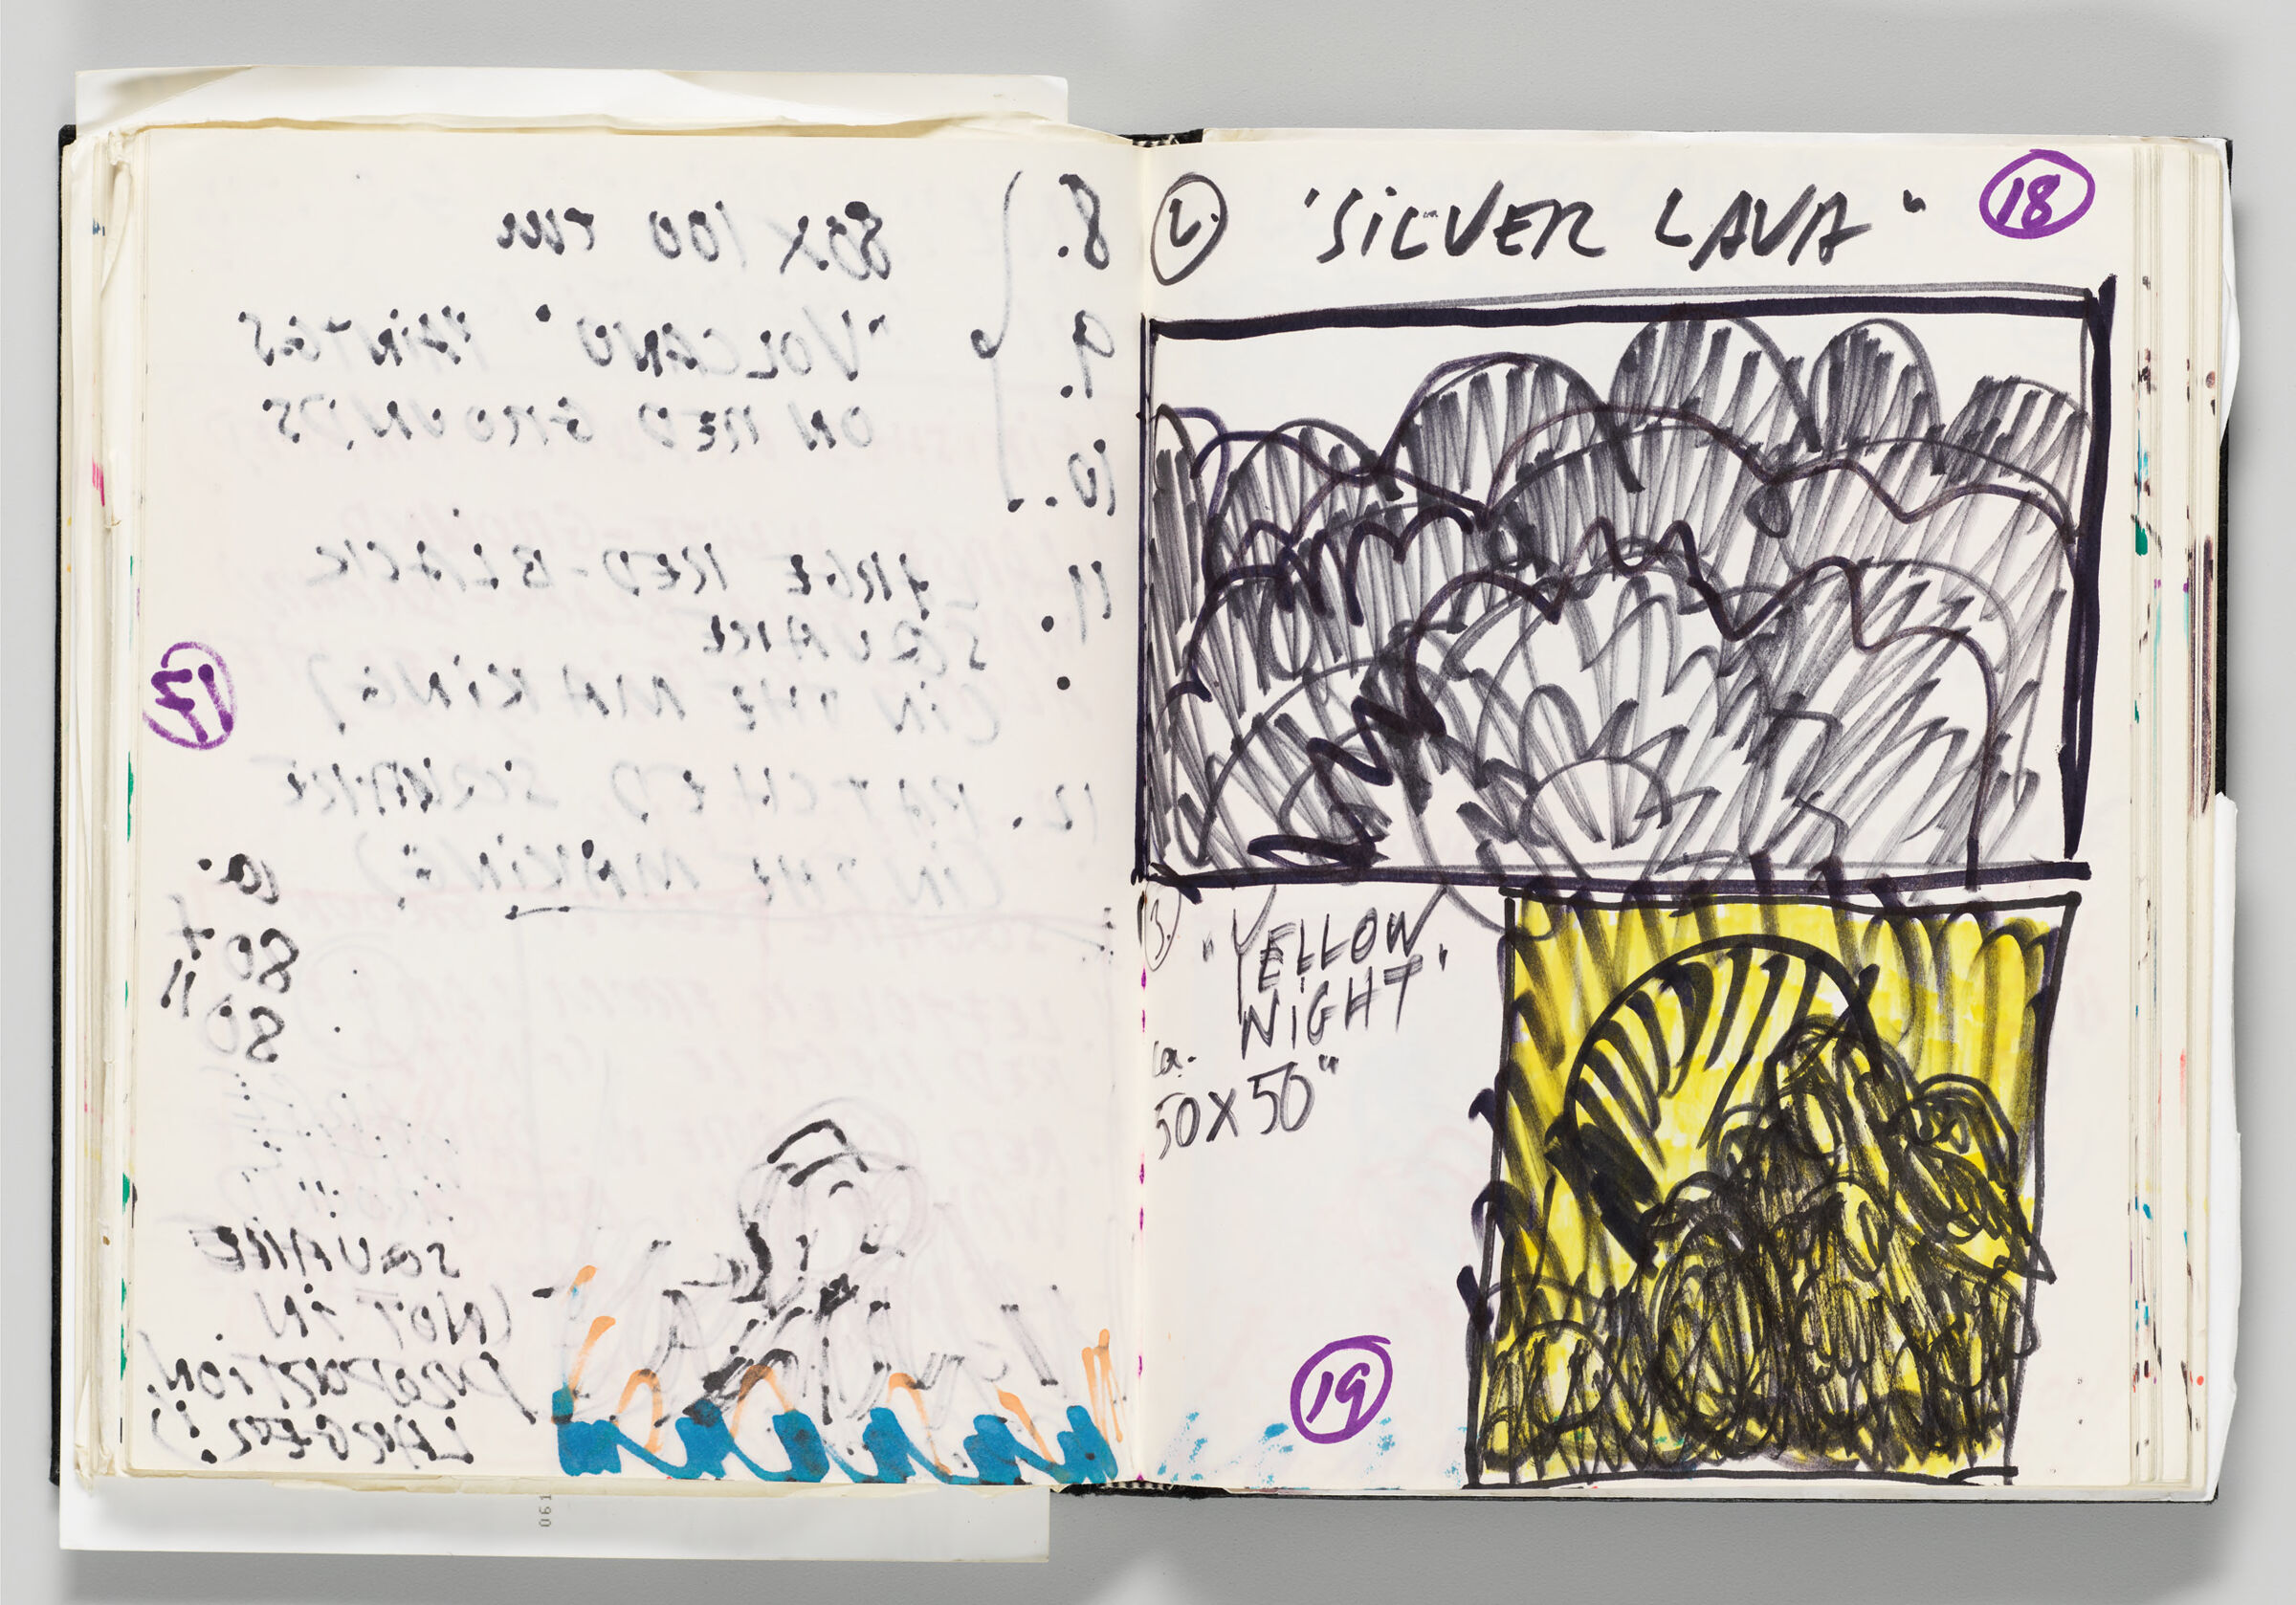 Untitled (Bleed-Through Of Previous Page And Color Transfer, Left Page); Untitled (Sketches And Notes On Paintings, Right Page)